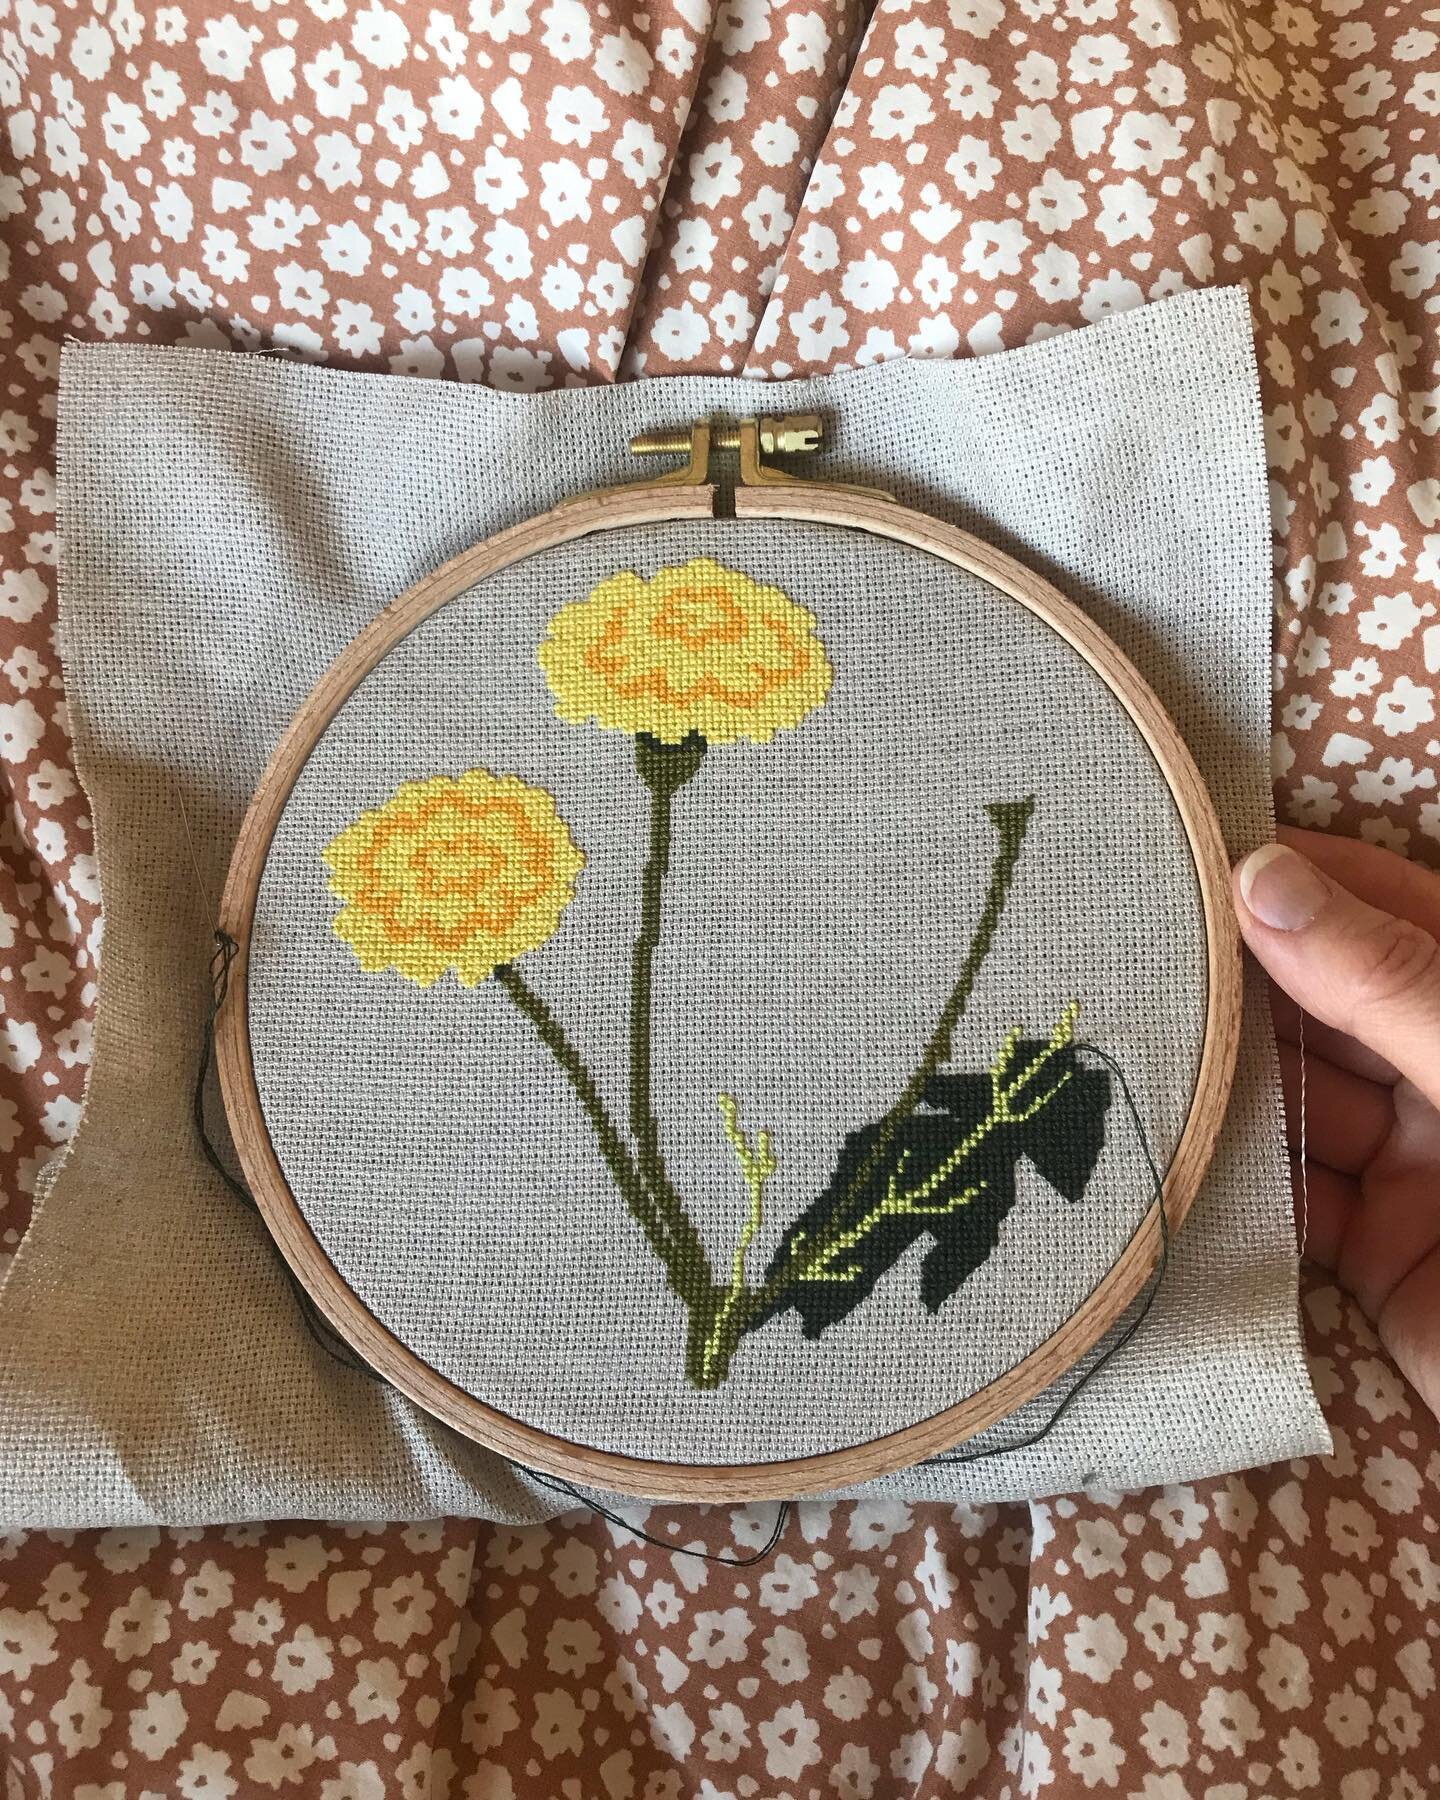 I seem to be in my cross-stitch era. These dandelions are from a pattern by @sayhitoyourdogshop